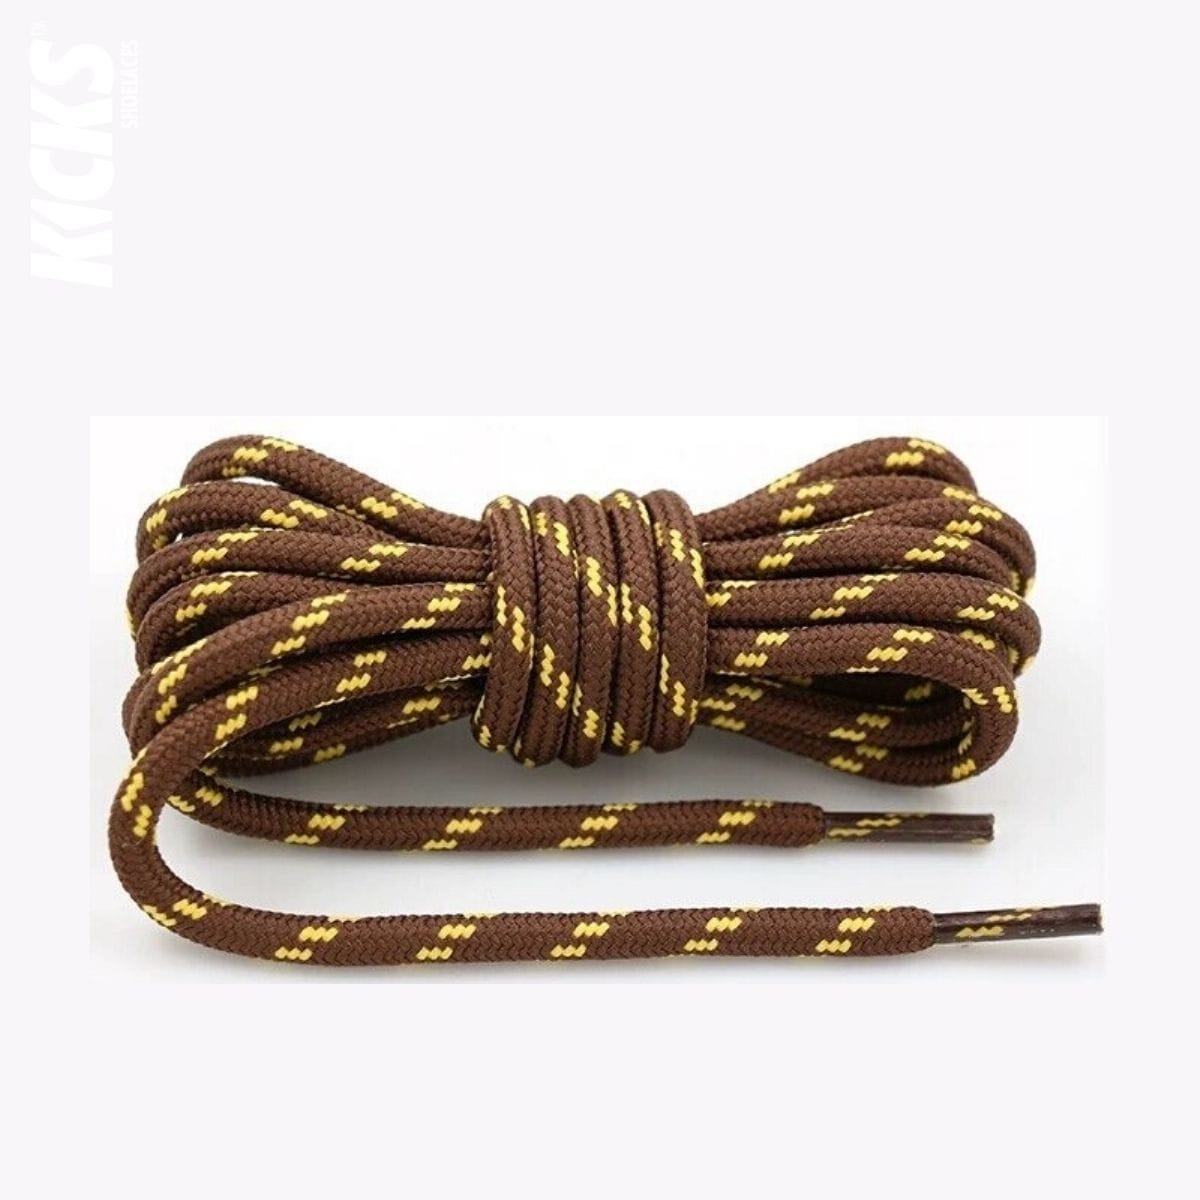 trekking-shoe-laces-united-states-in-deep-brown-and-yellow-shop-online